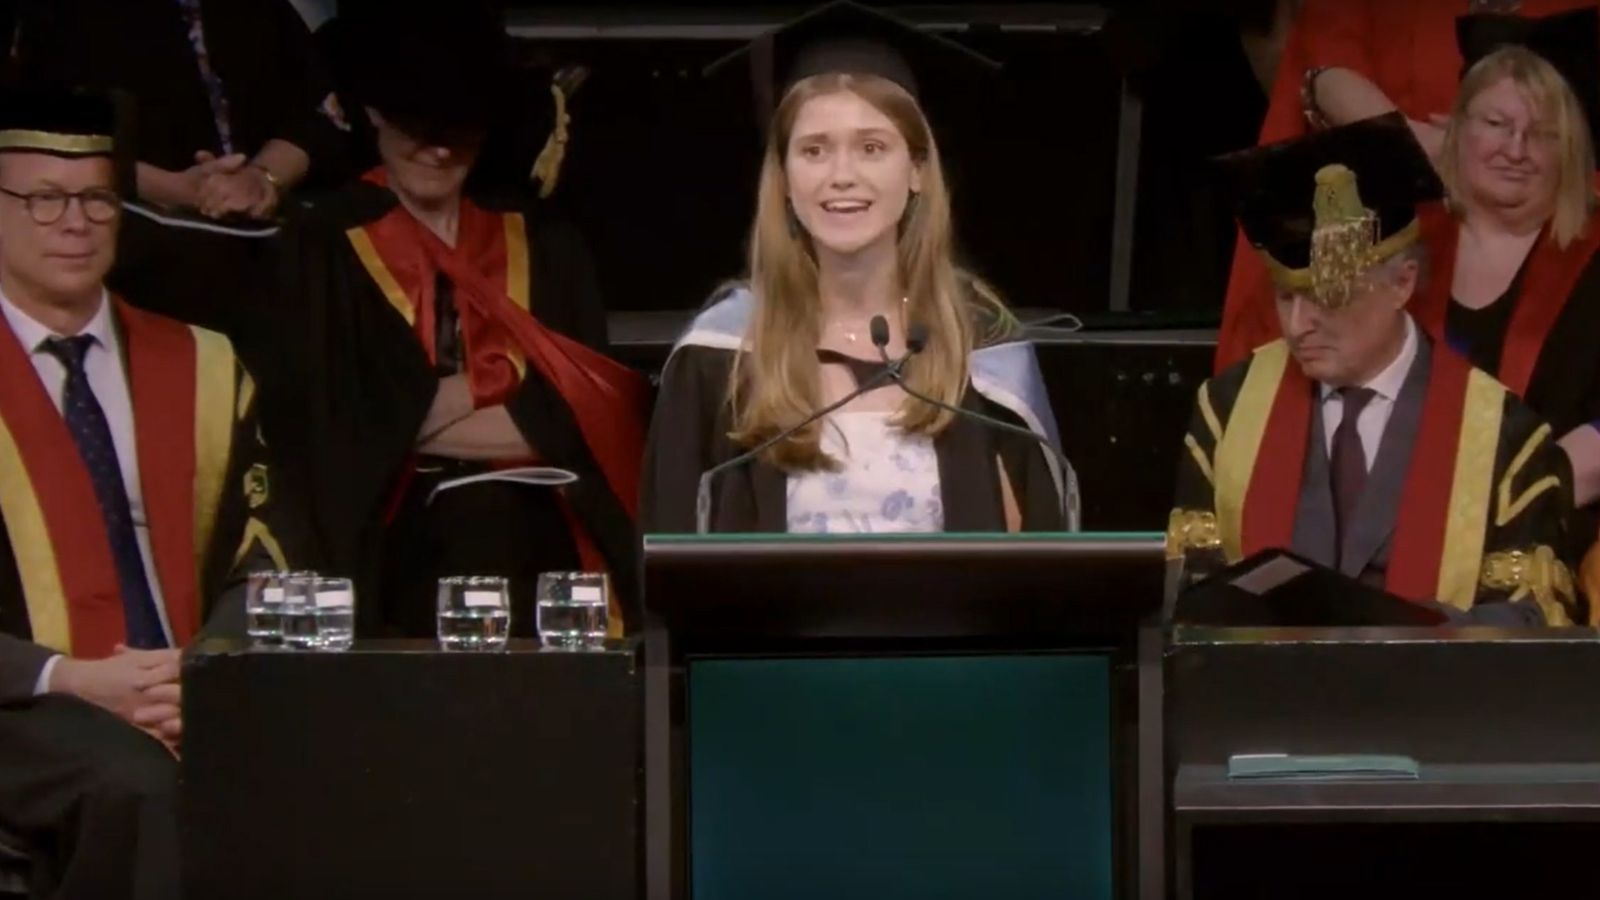 A smiling graduate wearing academic robes speaking at the ceremony.